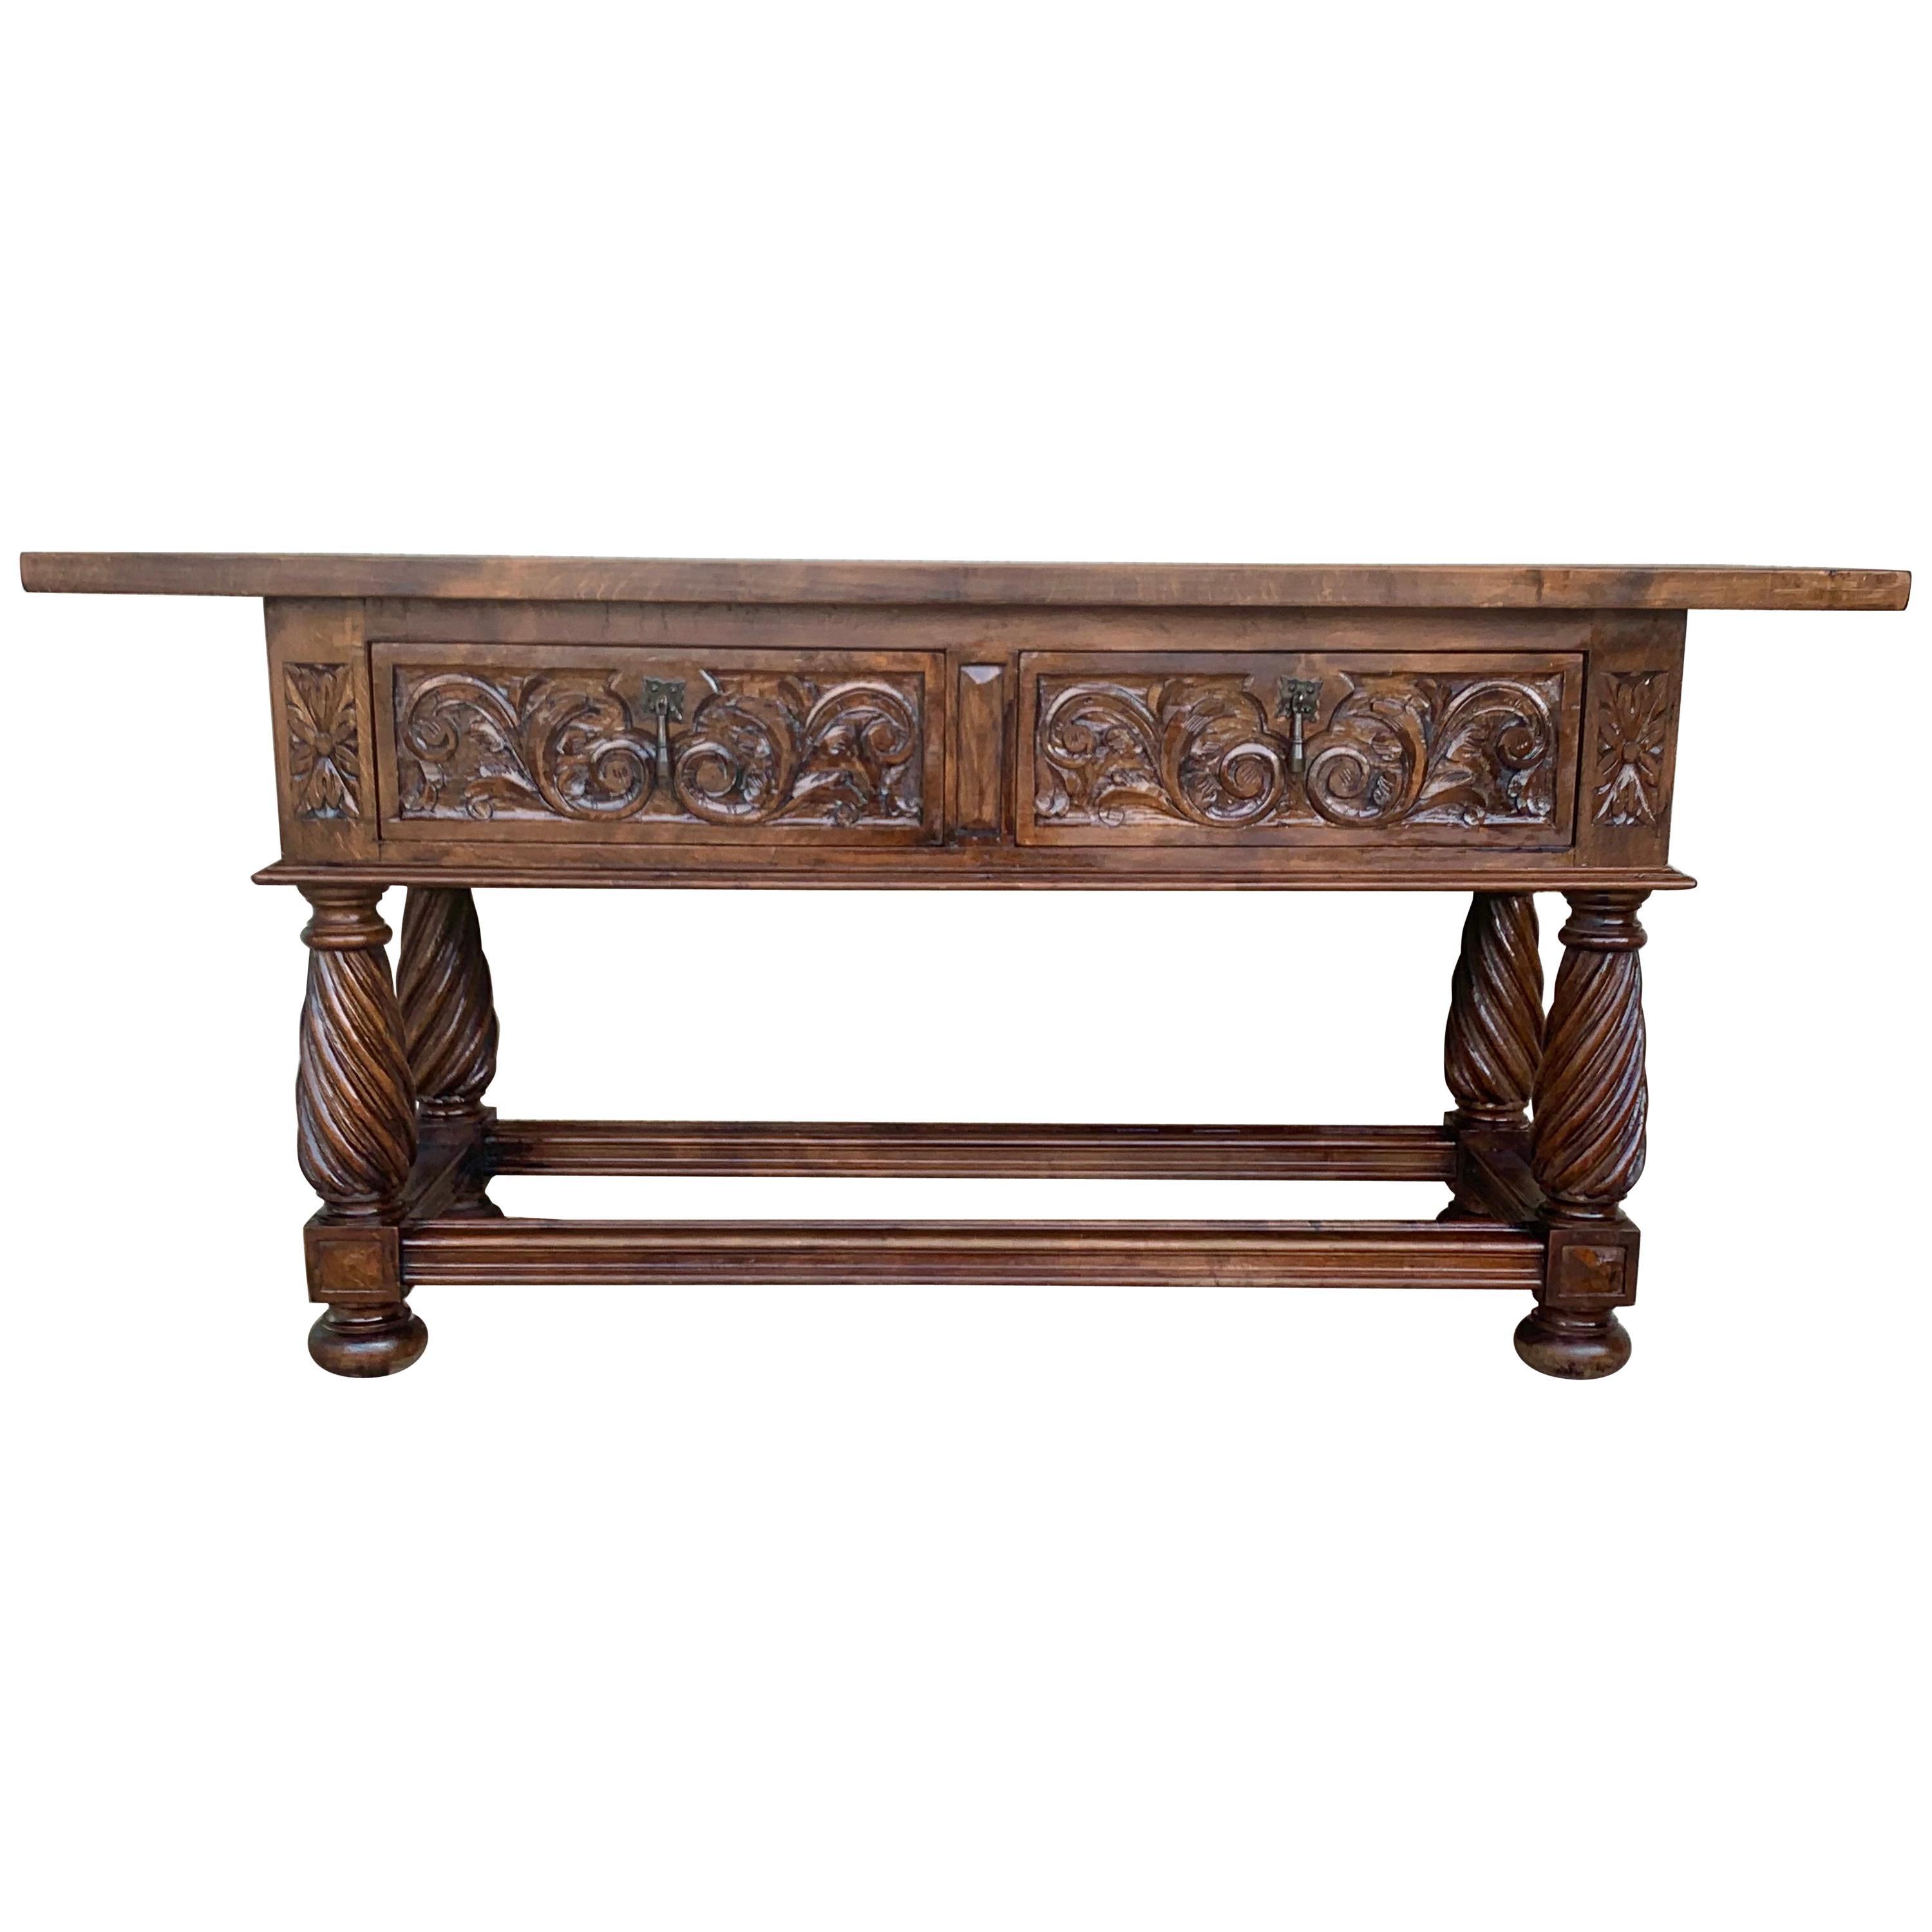 19th Spanish Low Console Table with Solomonic Legs & Two Carved Drawers